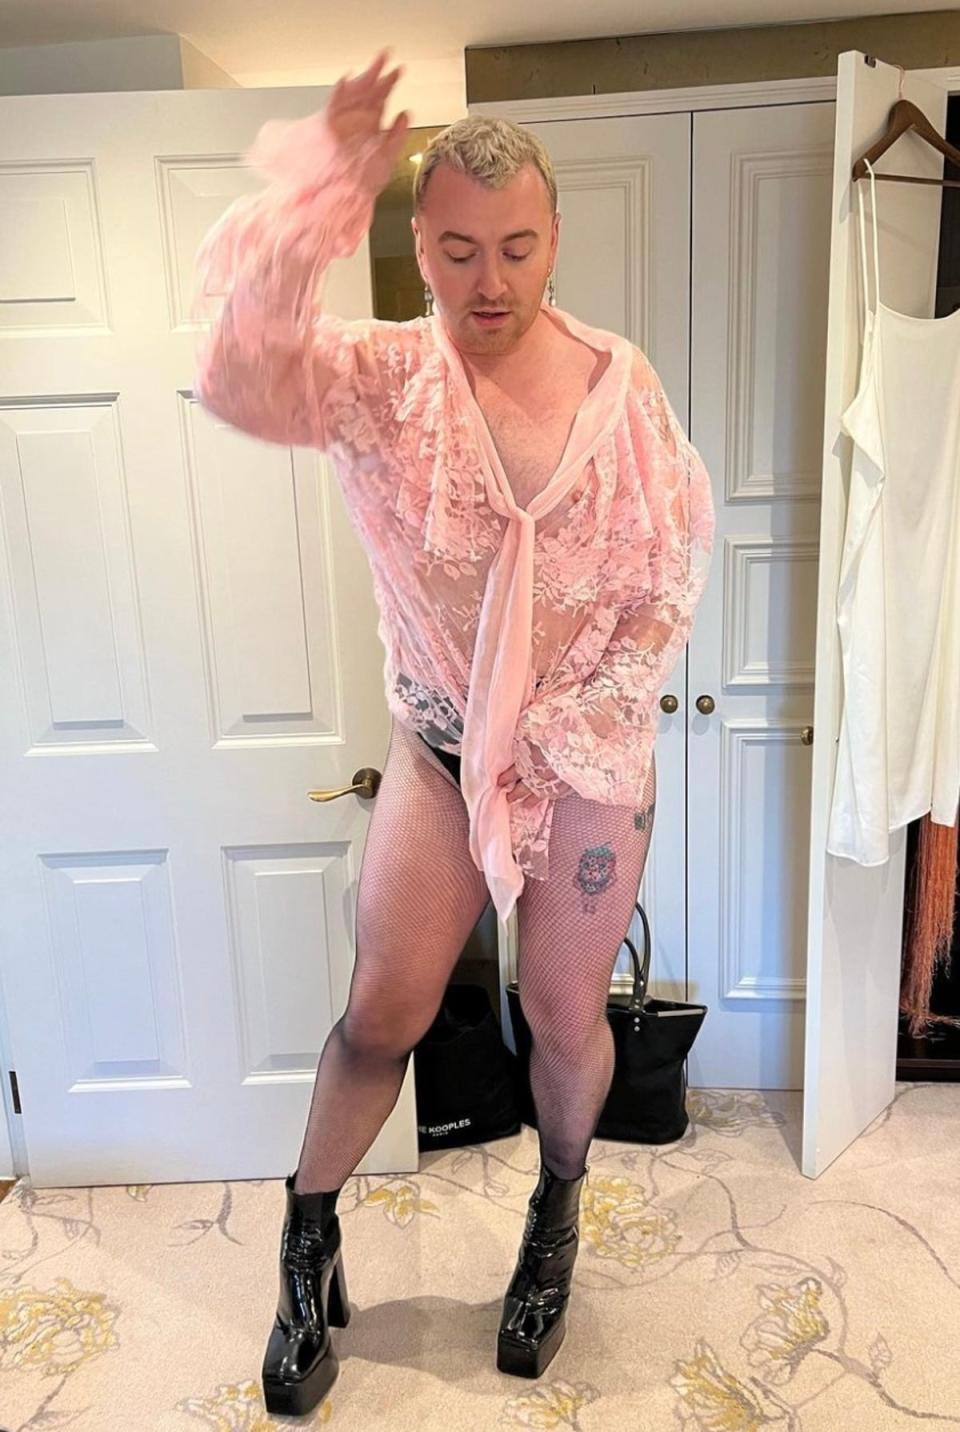 Smith’s selfie came after they recently posted a photo of them dressed in a revealing pink lace shirt and fishnet stockings (Sam Smith/Instagram)